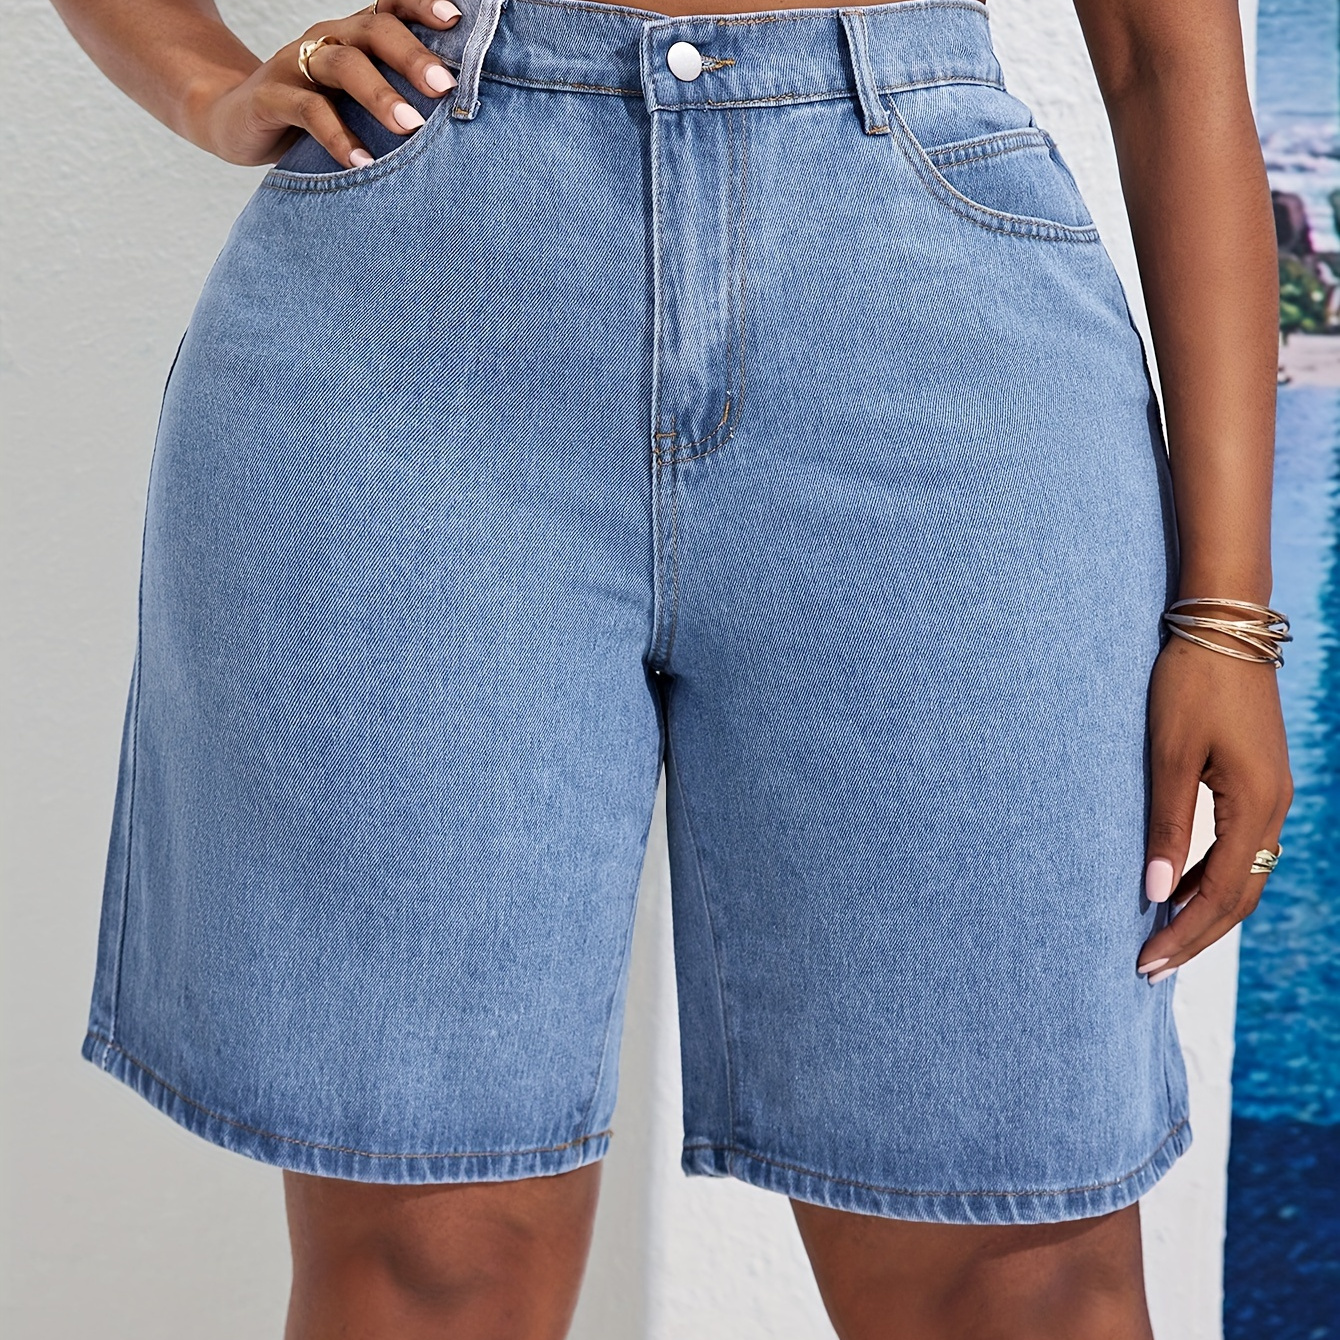 

Women's Plus Size Casual Light Blue Denim Bermuda Shorts, High-waist Jean Jorts With Pockets For Summer Outings And Everyday Wear